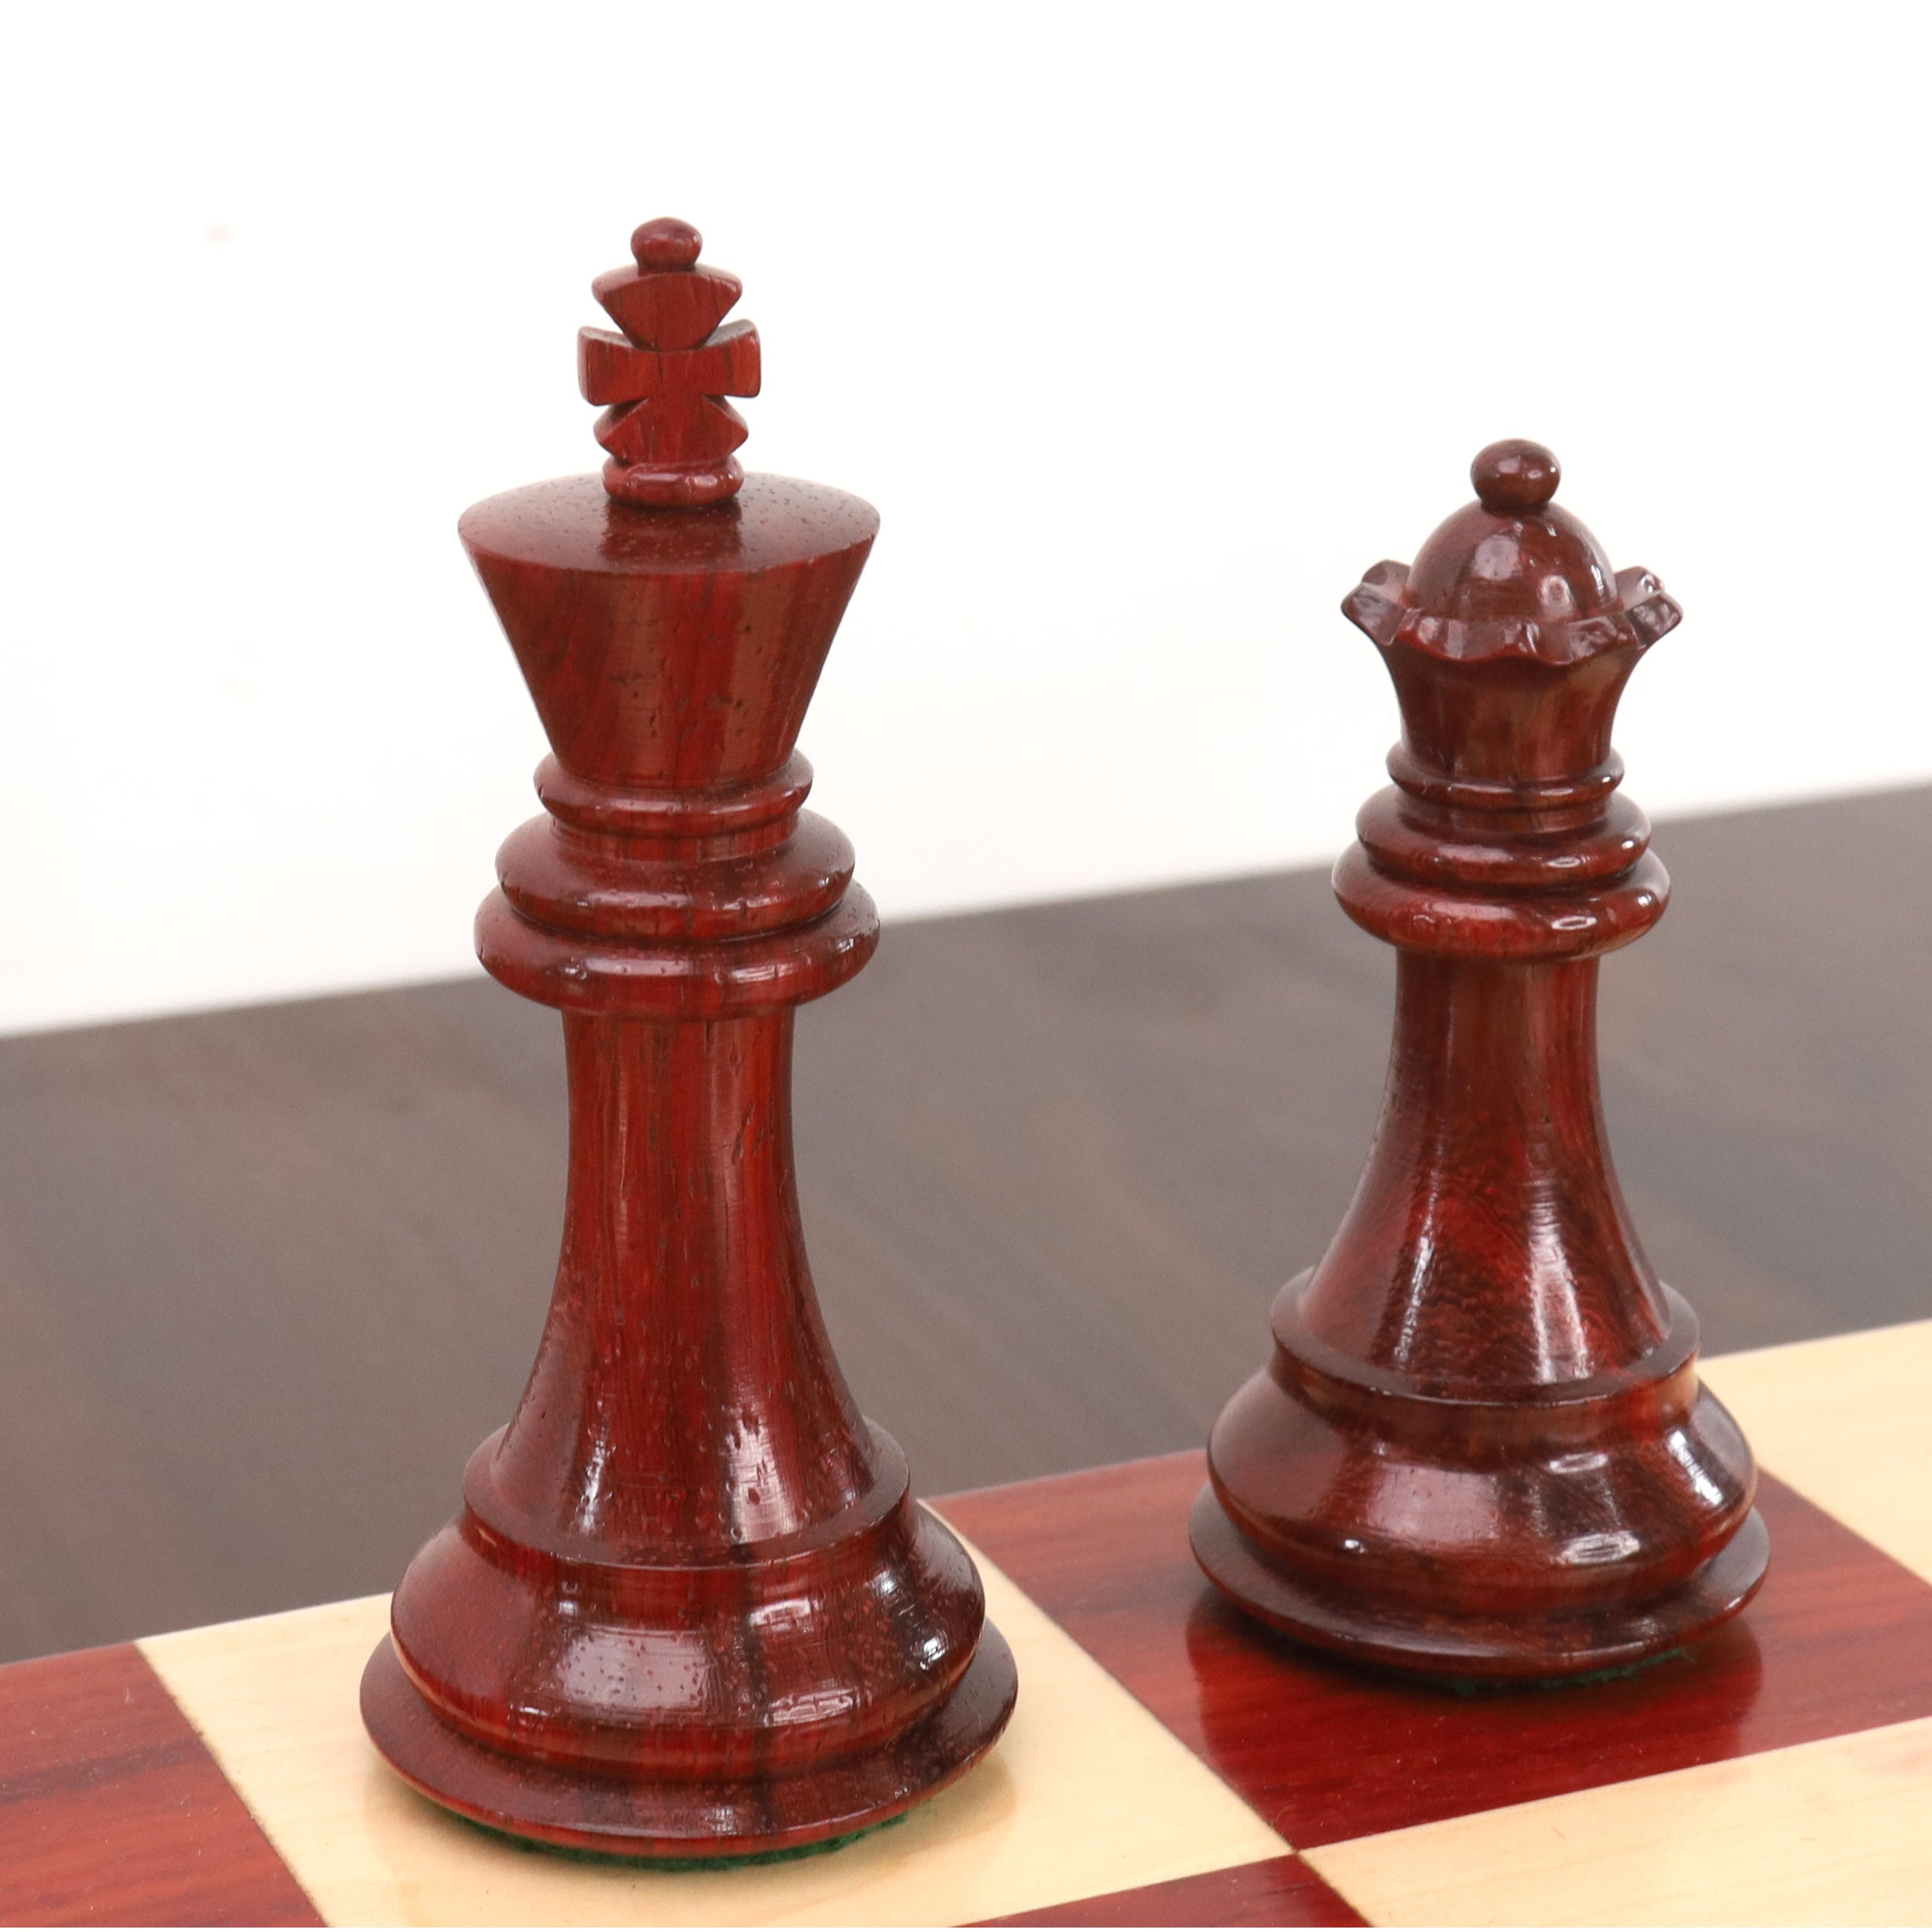 3.9" Professional Staunton Chess Set- Chess Pieces Only - Weighted Budrose wood